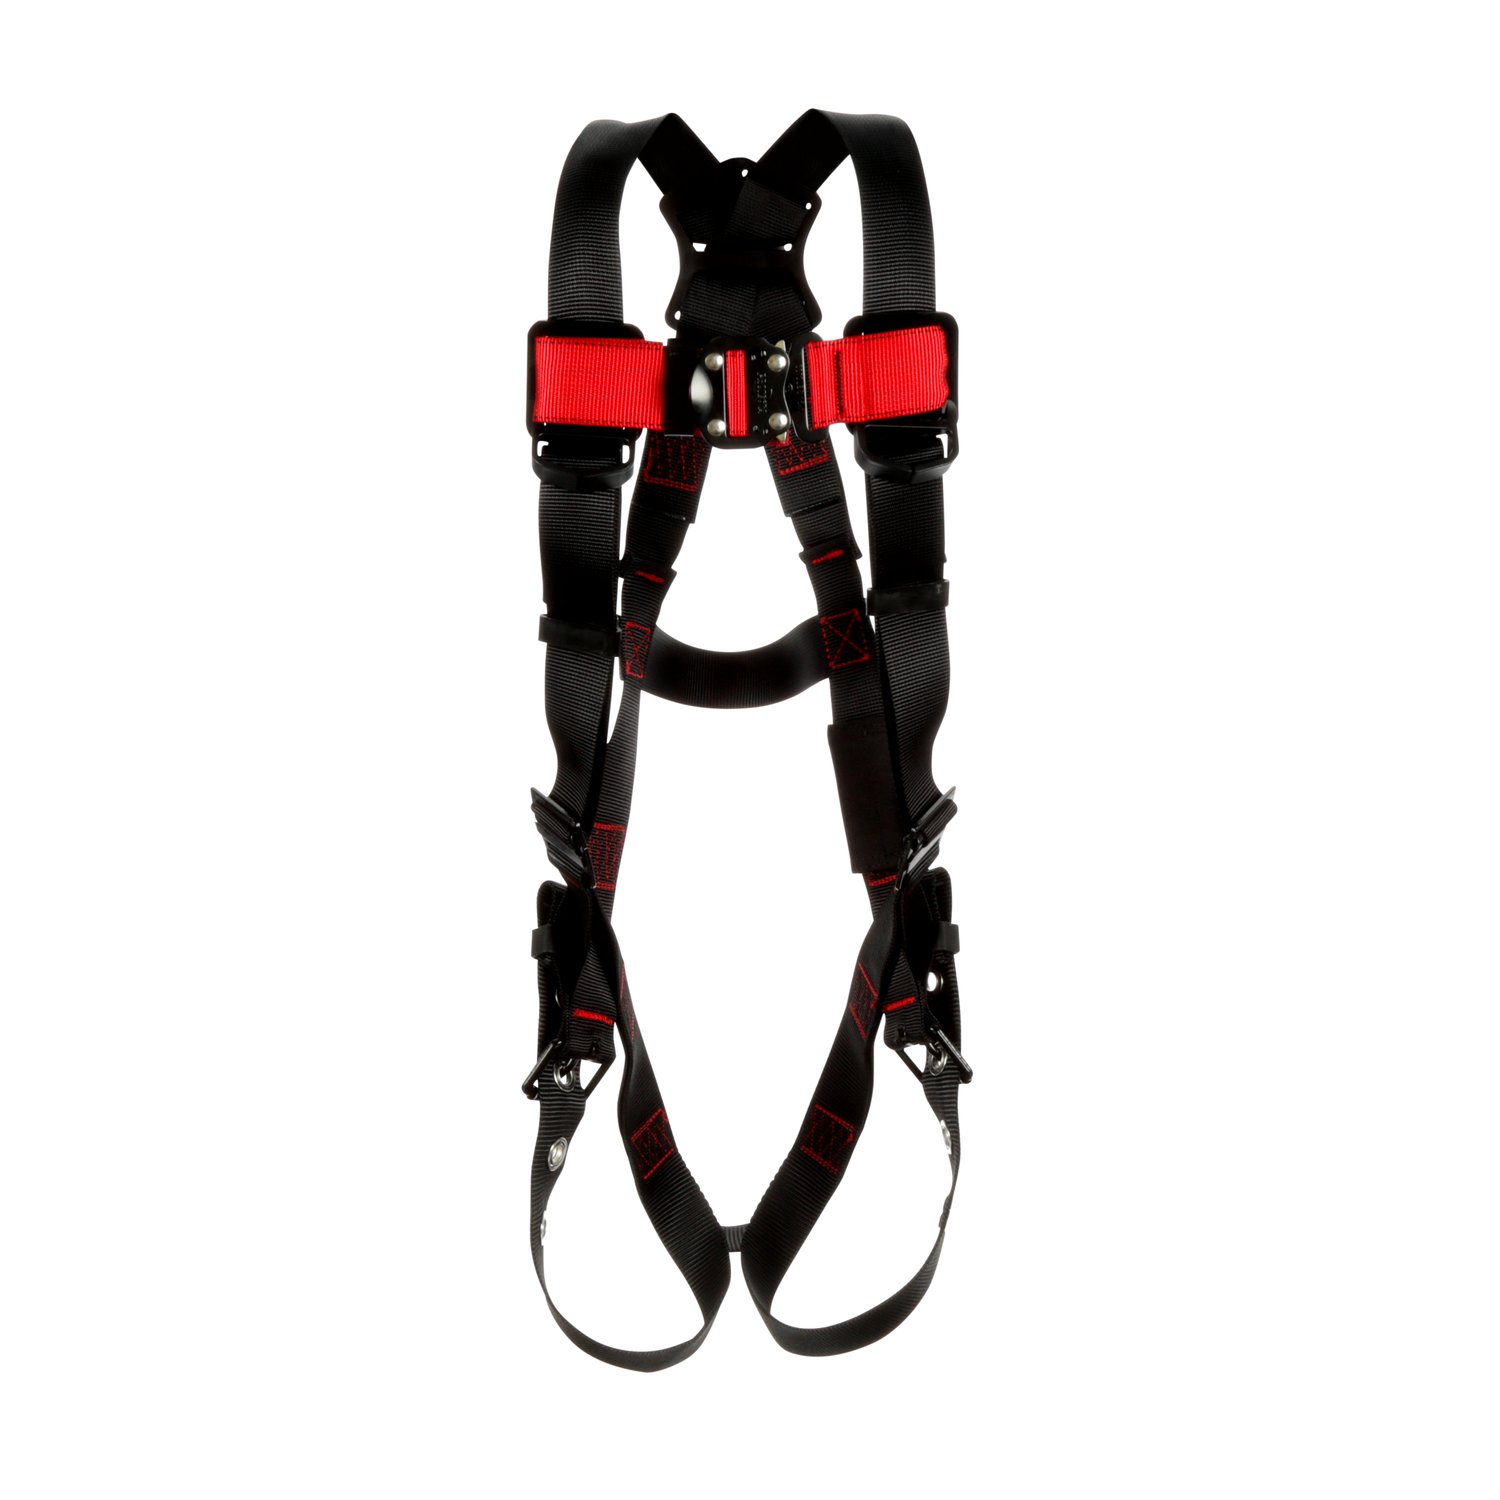 7012816740 - 3M Protecta P200 Vest Safety Harness 1161500, X-Small